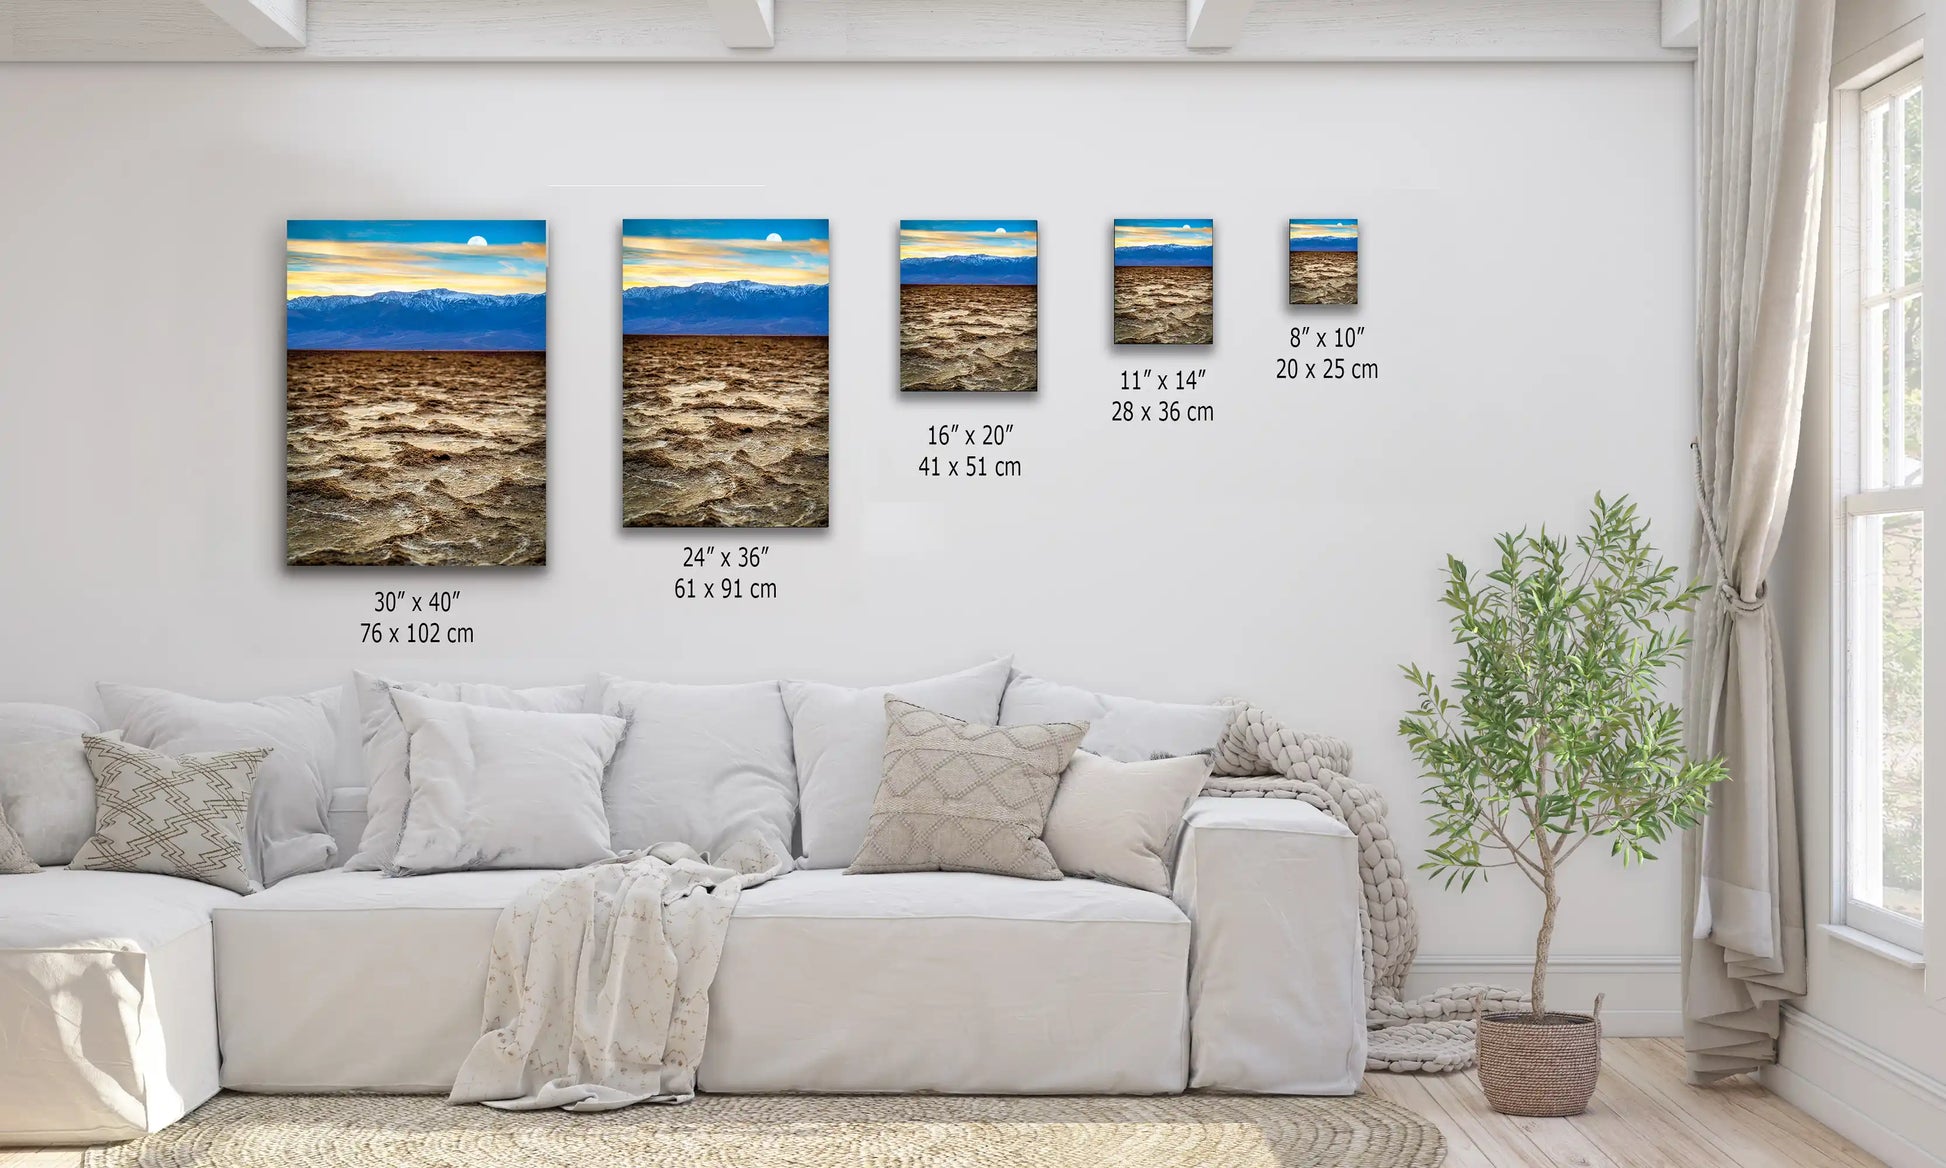 Wall art of varying sizes on display, each depicting the stunning landscape of Death Valley's Badwater Basin.